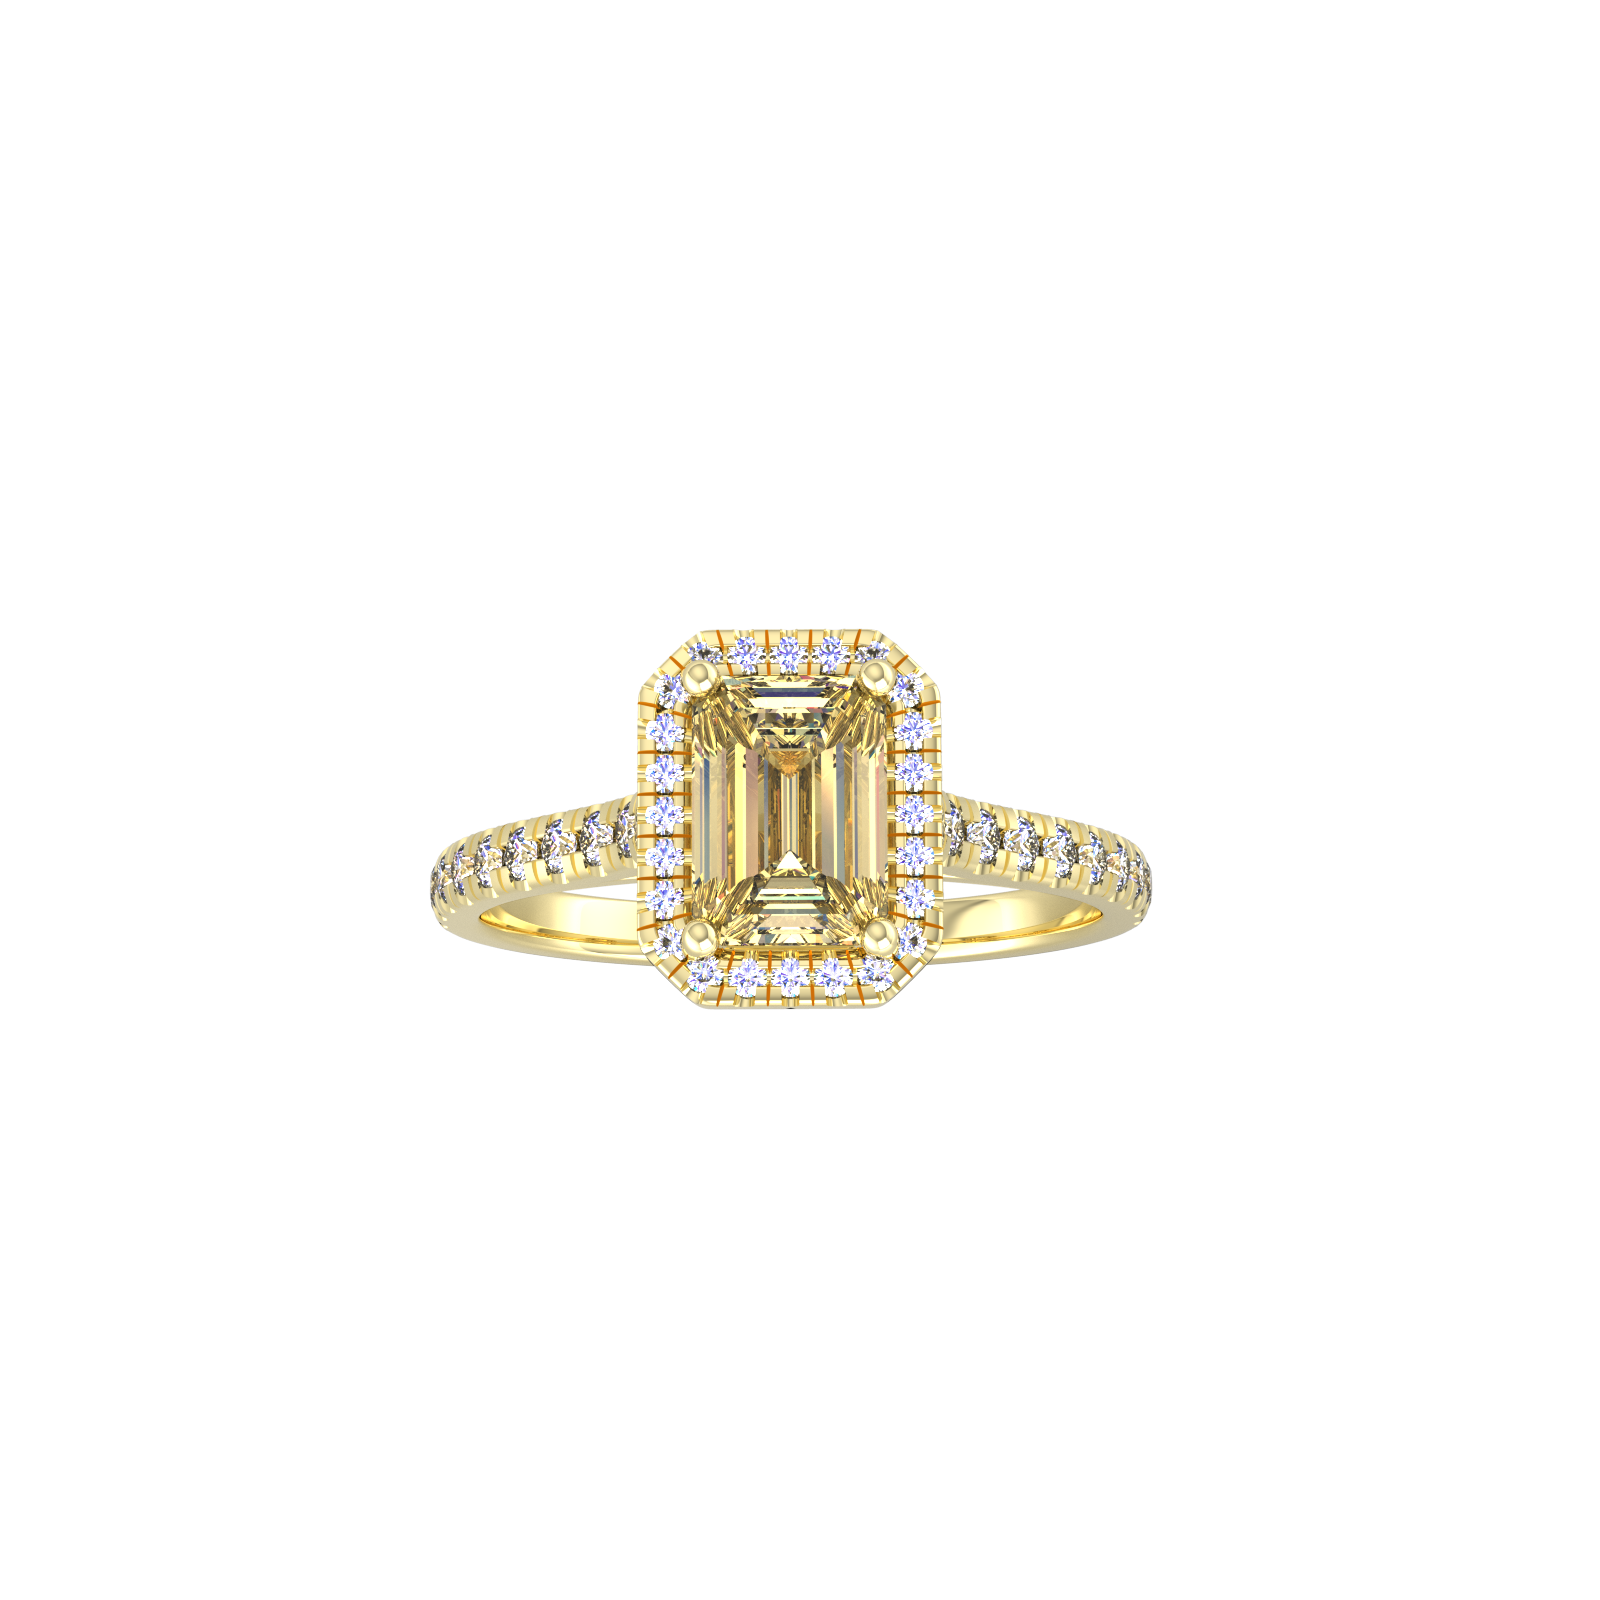 9ct Yellow Gold Citrine & Diamond Halo Ring with Diamond Shoulders - Ring Size G.5